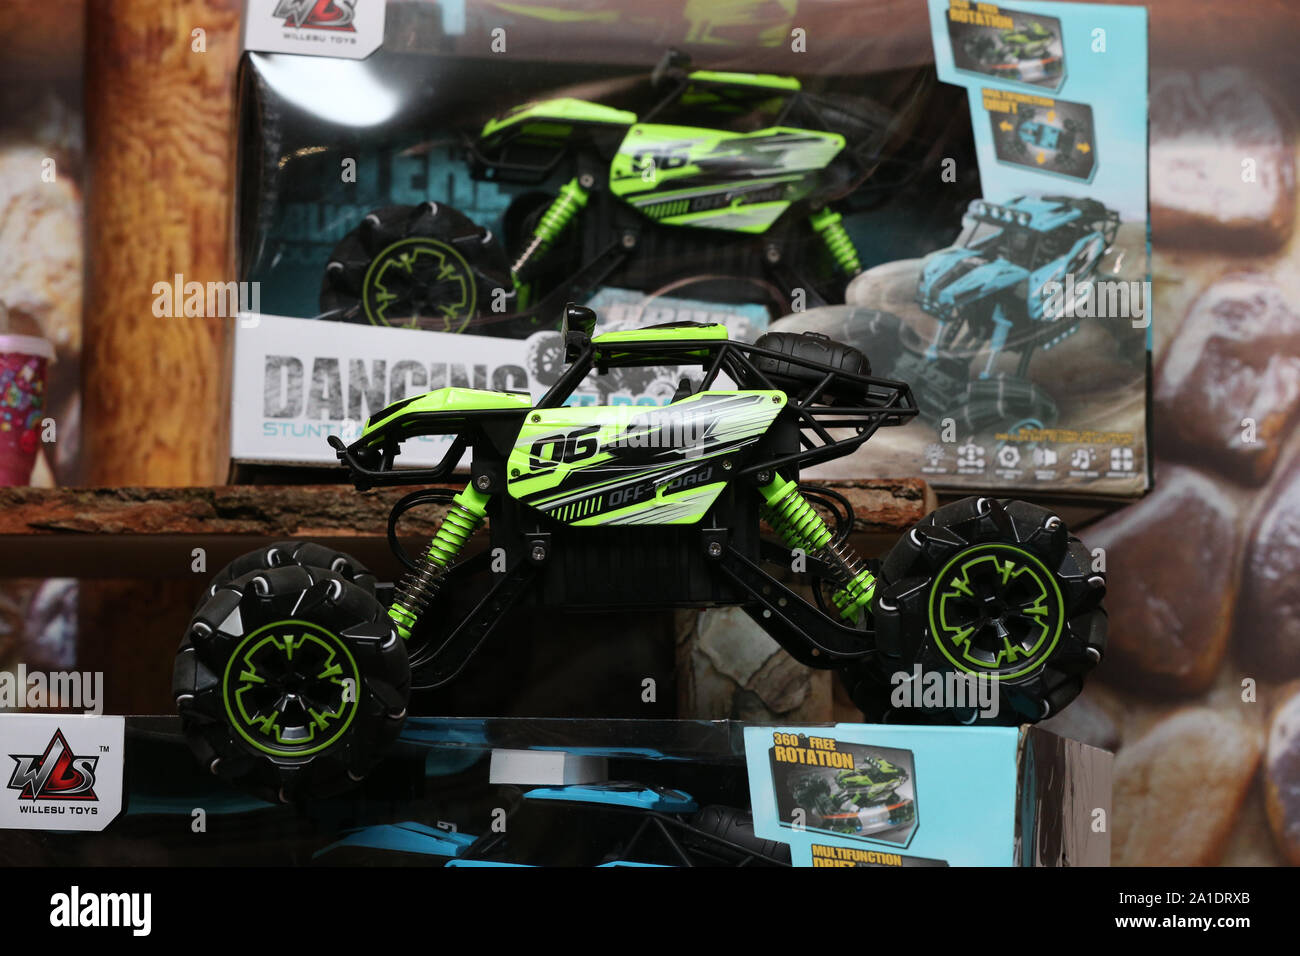 The new Oblique Drifter remote control buggy on display during the Hamleys Christmas toy showcase at Hamleys, Regent Street, London. Stock Photo